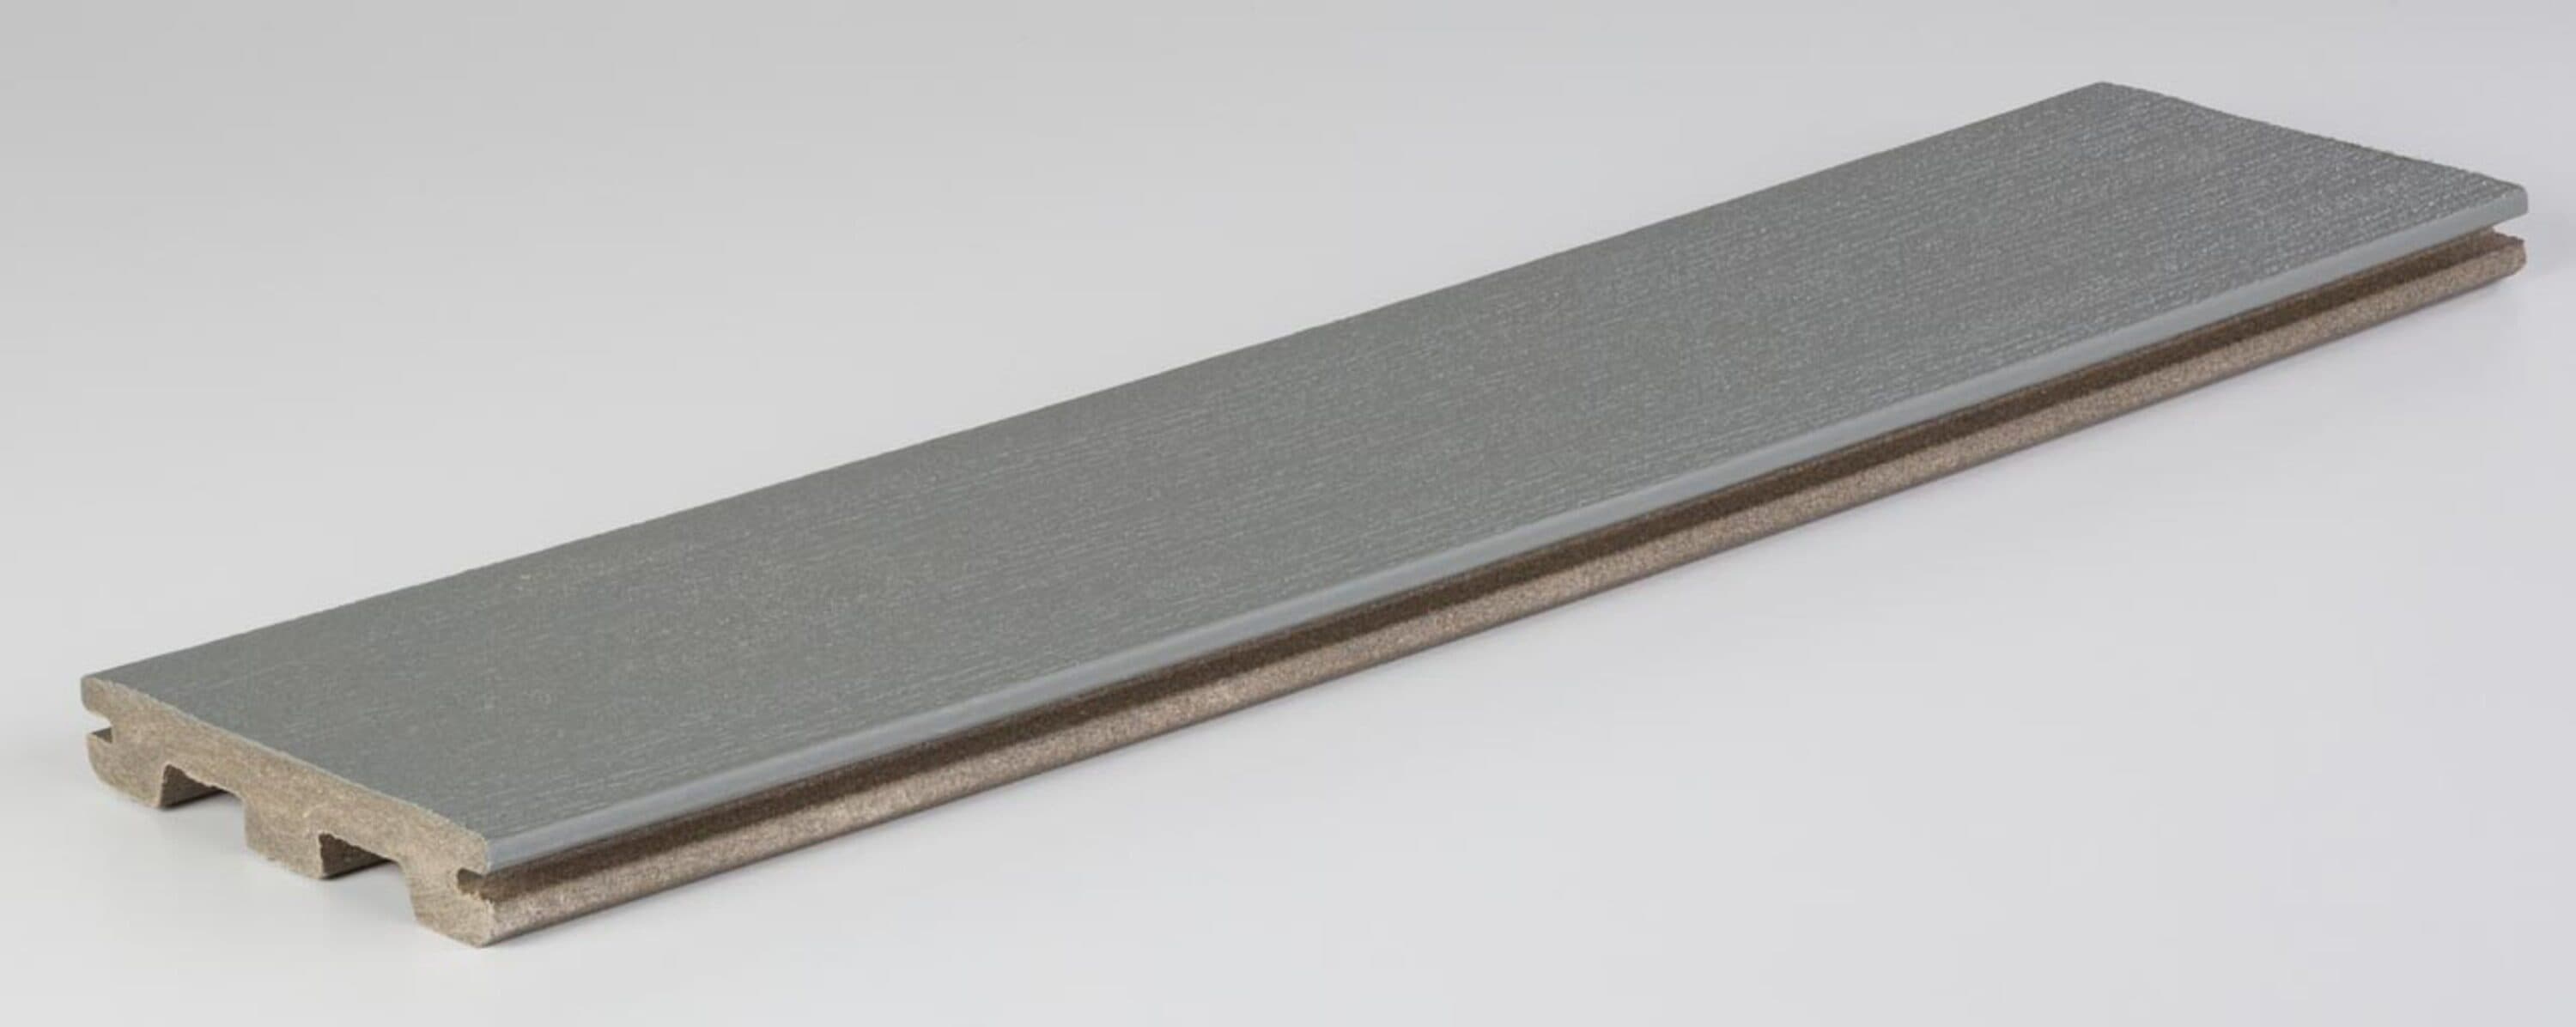 Prime 5/4-in x 6-in x 20-ft Maritime Gray Grooved Composite Deck Board | - TimberTech ESGV5420MG